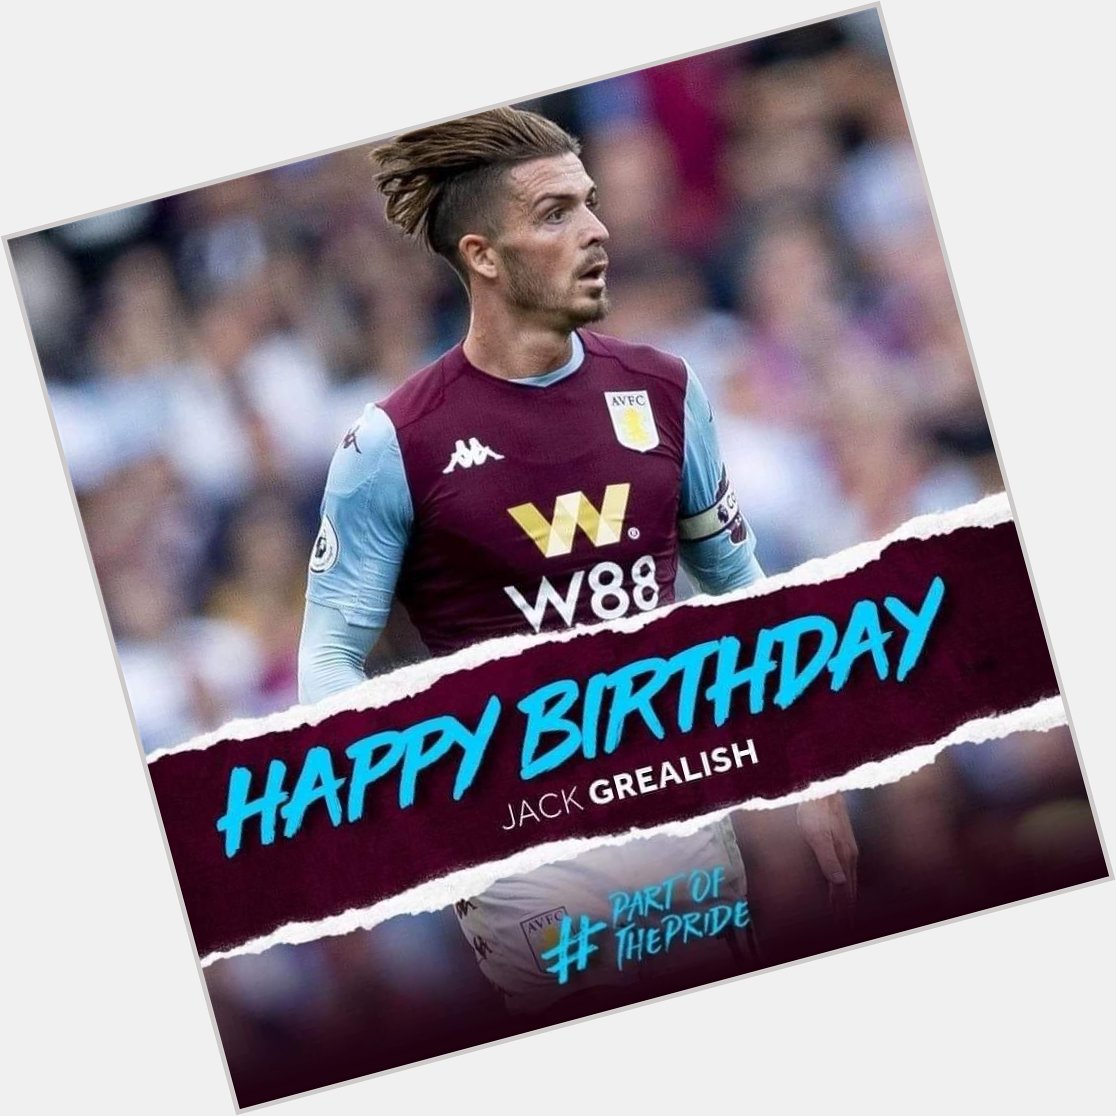    Happy 25th birthday to our captain & one of our own Jack Grealish.       